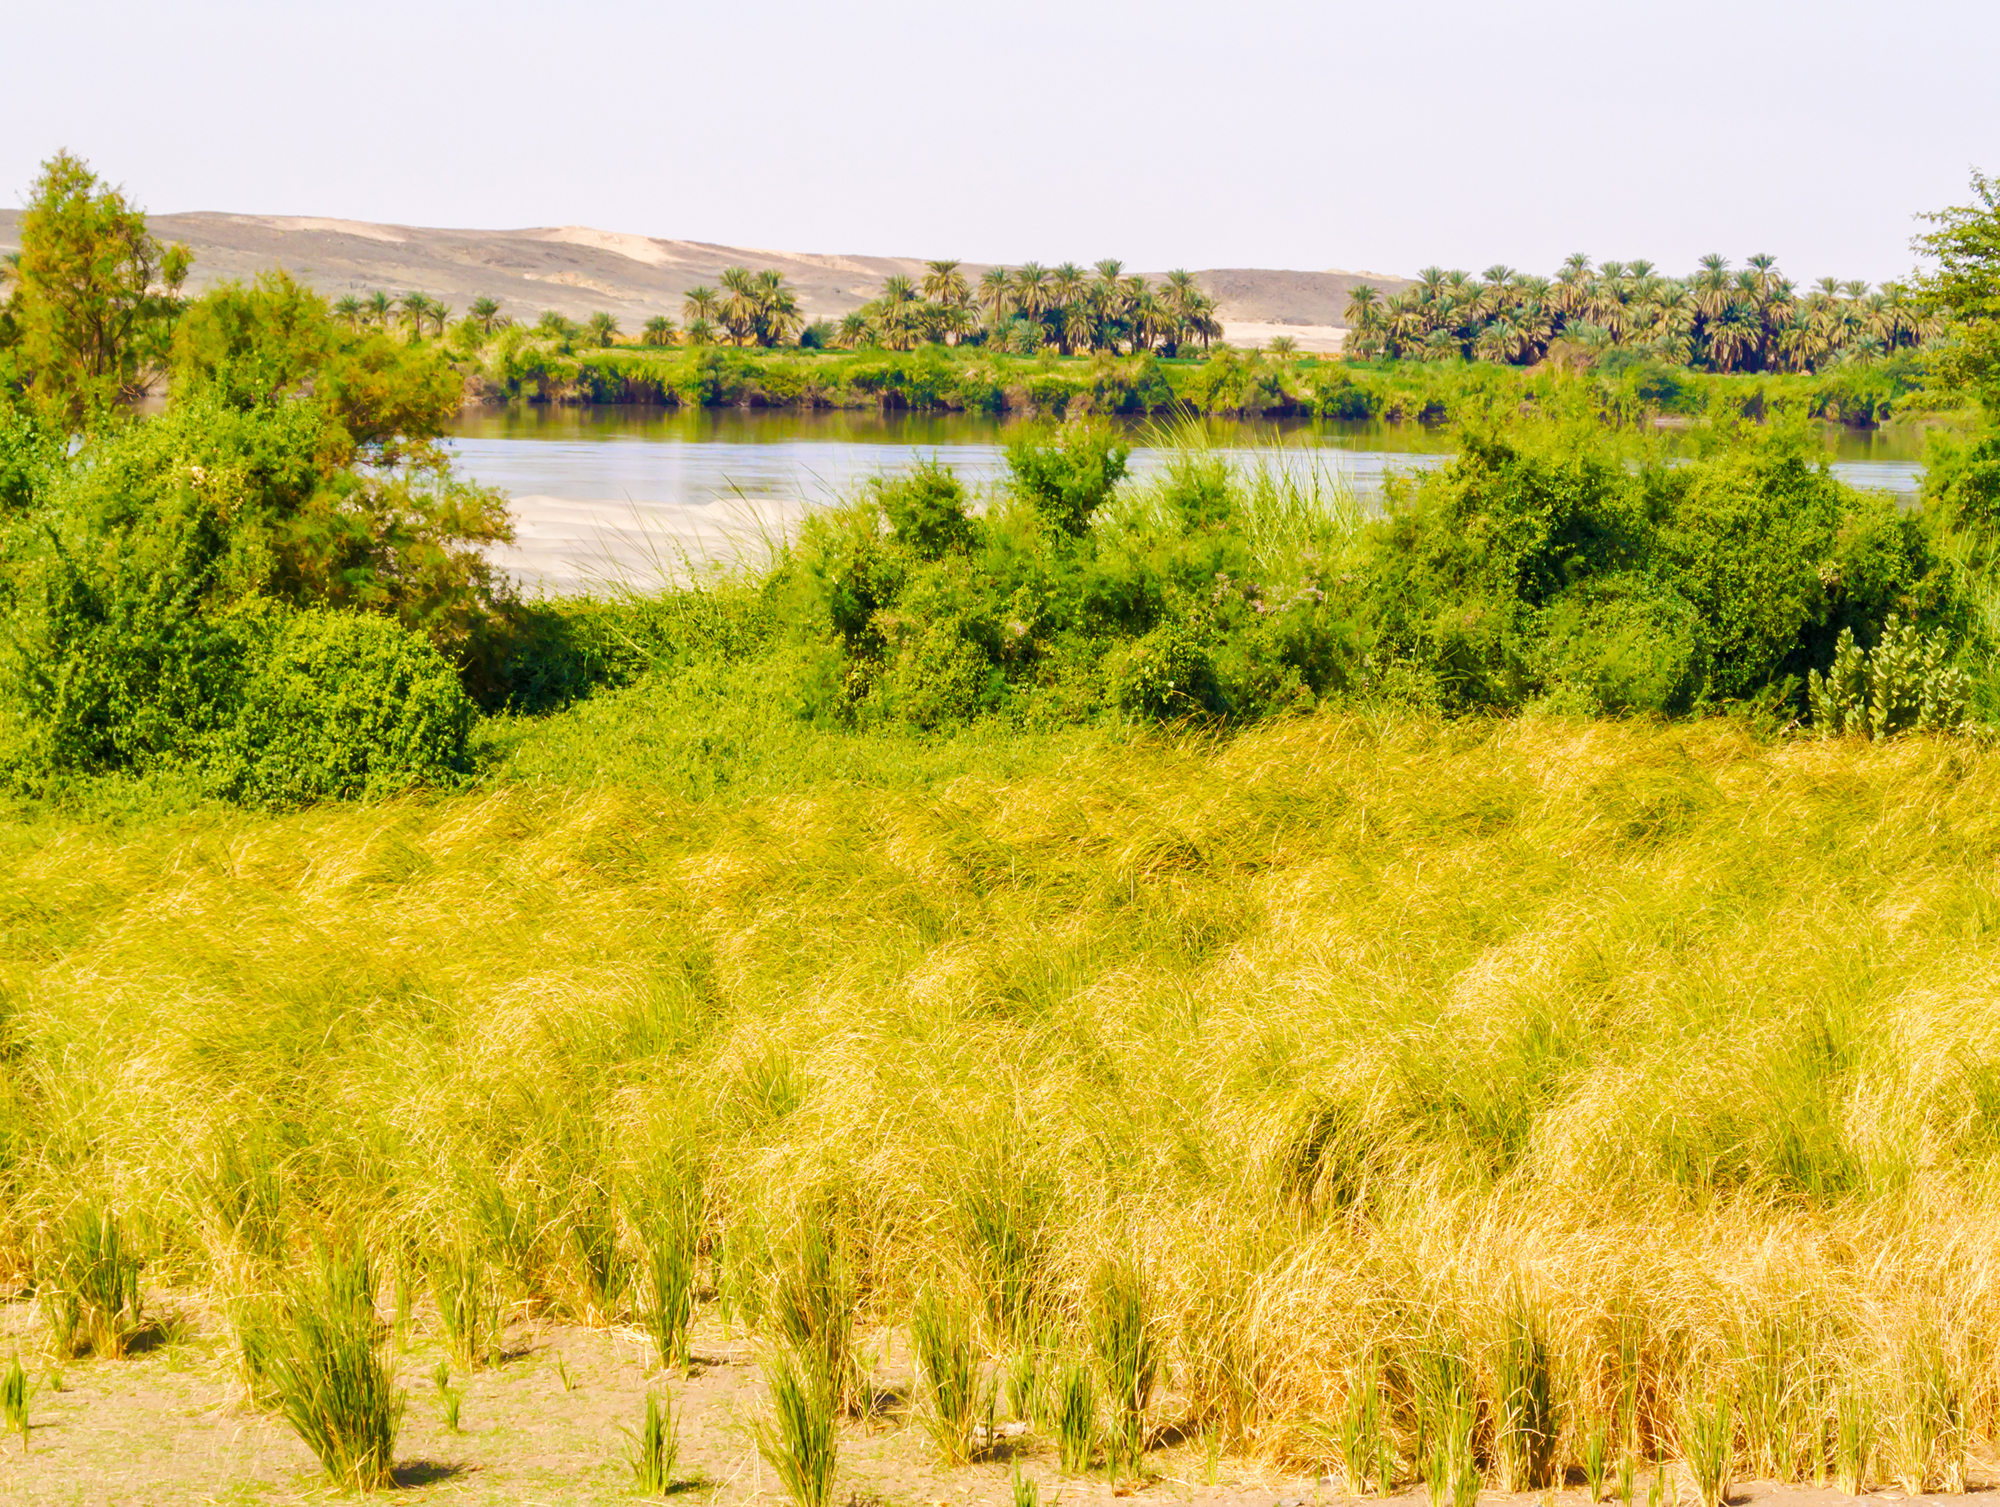 The lush scenery of the Wadi Halfa pilgrimage site that became a gathering place for humans.